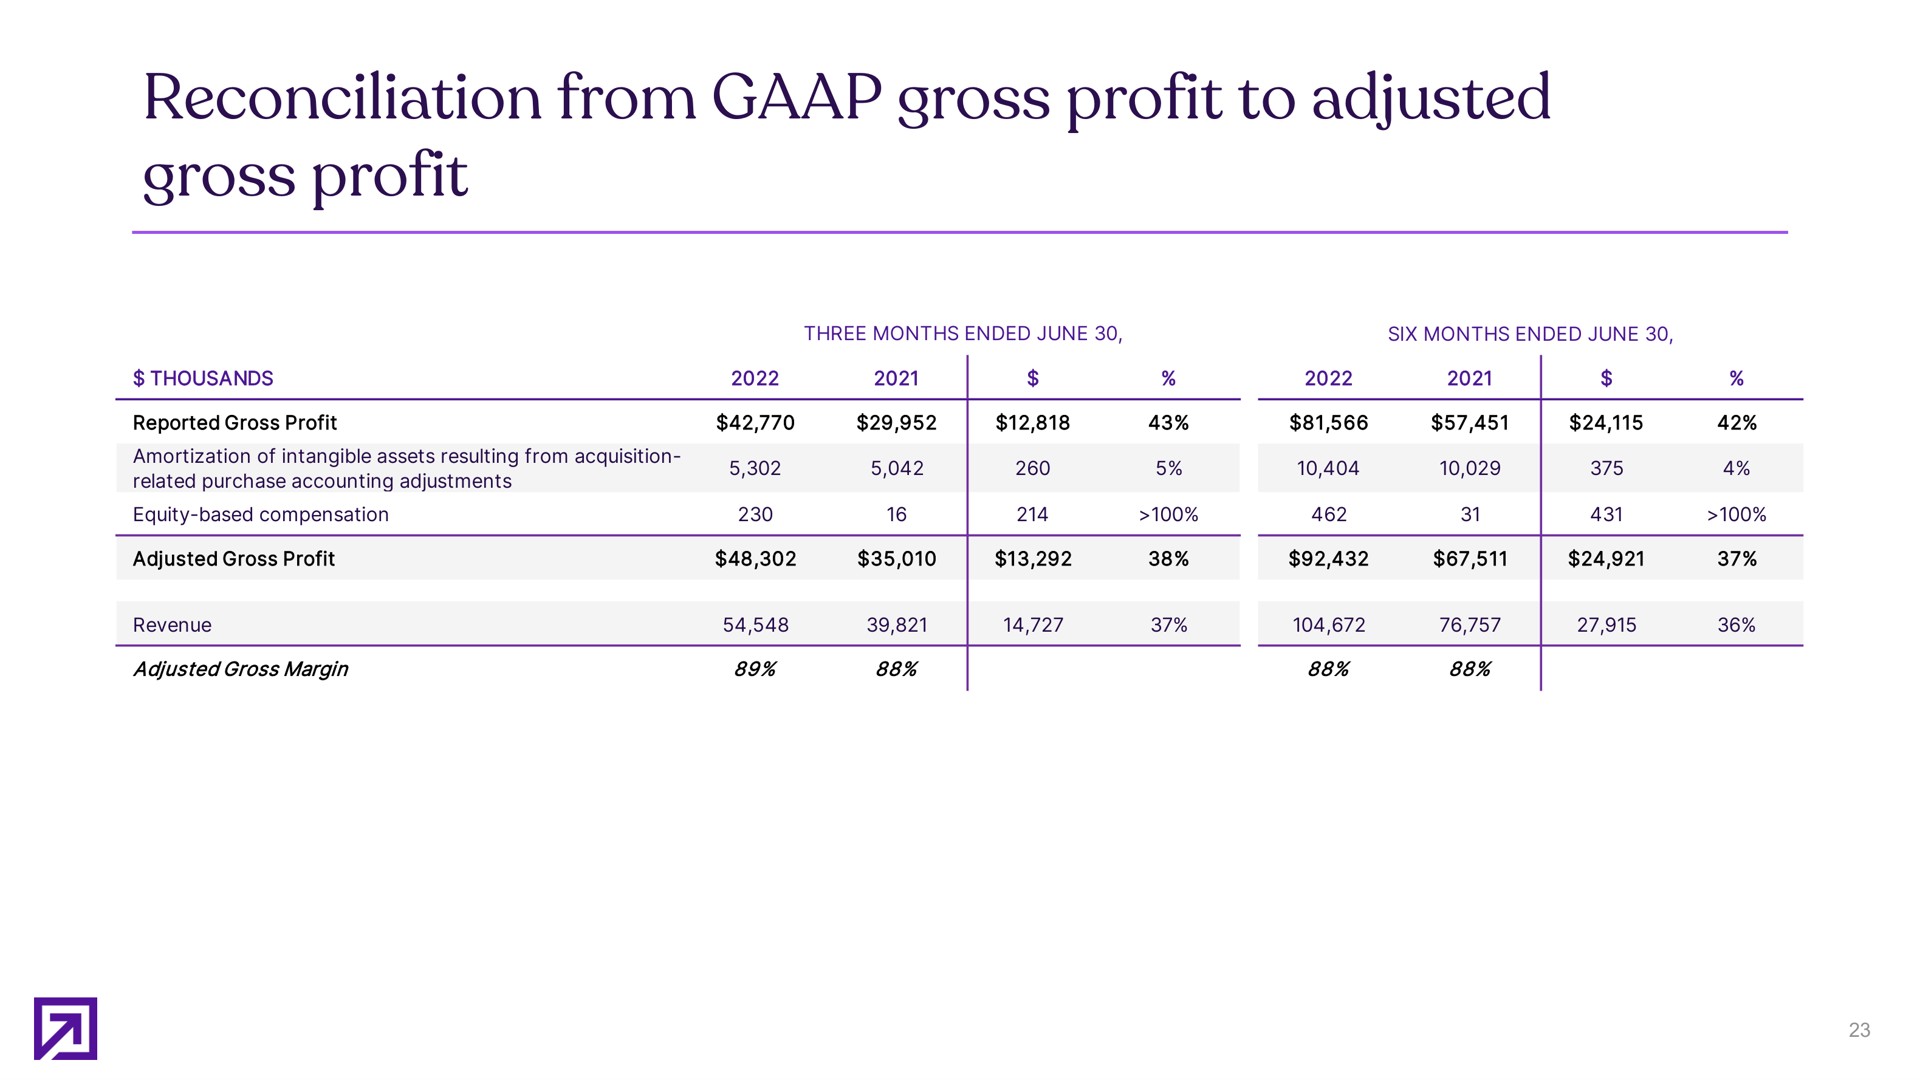 reconciliation from gross profit to adjusted gross profit saa toon | Definitive Healthcare